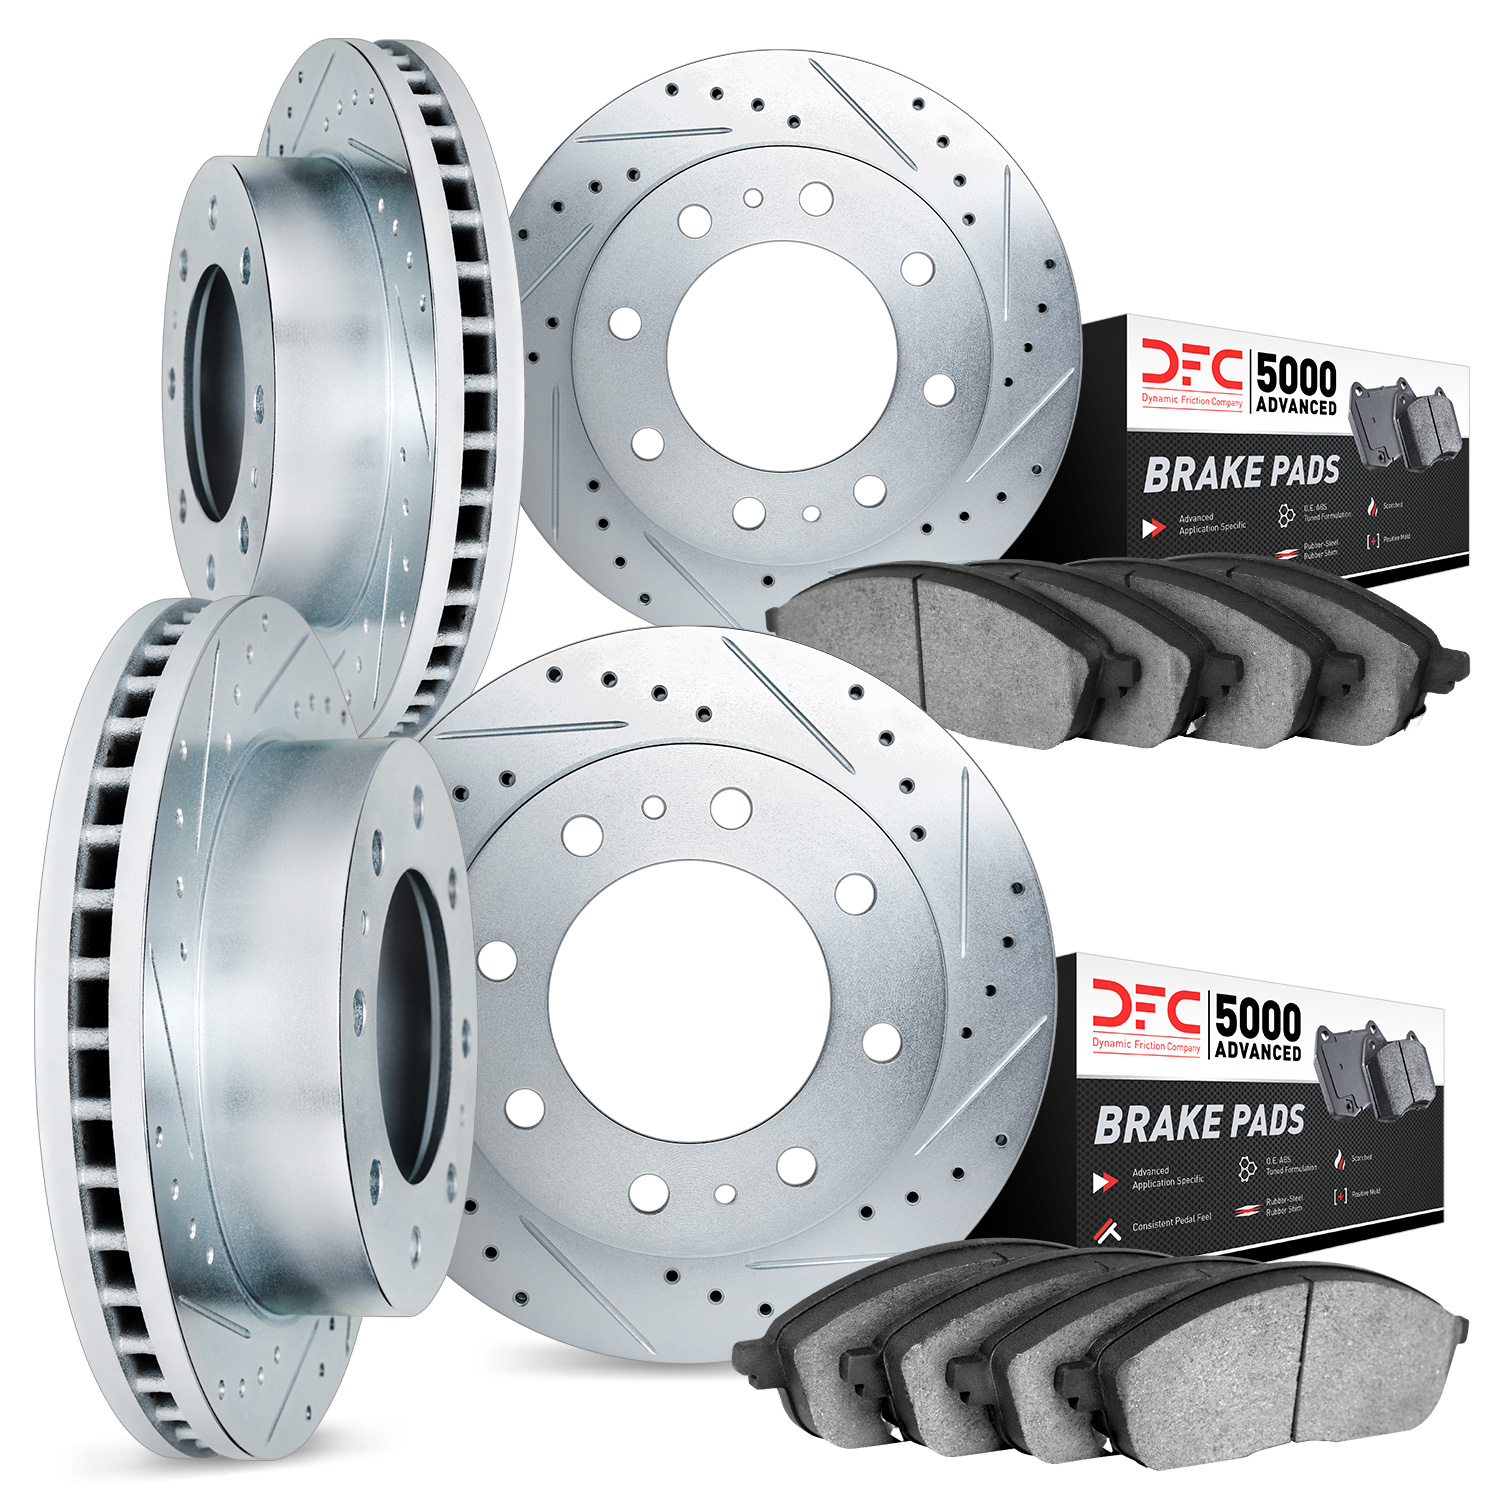 7504-54336 Drilled/Slotted Brake Rotors w/5000 Advanced Brake Pads Kit [Silver], 1999-2002 Ford/Lincoln/Mercury/Mazda, Position: